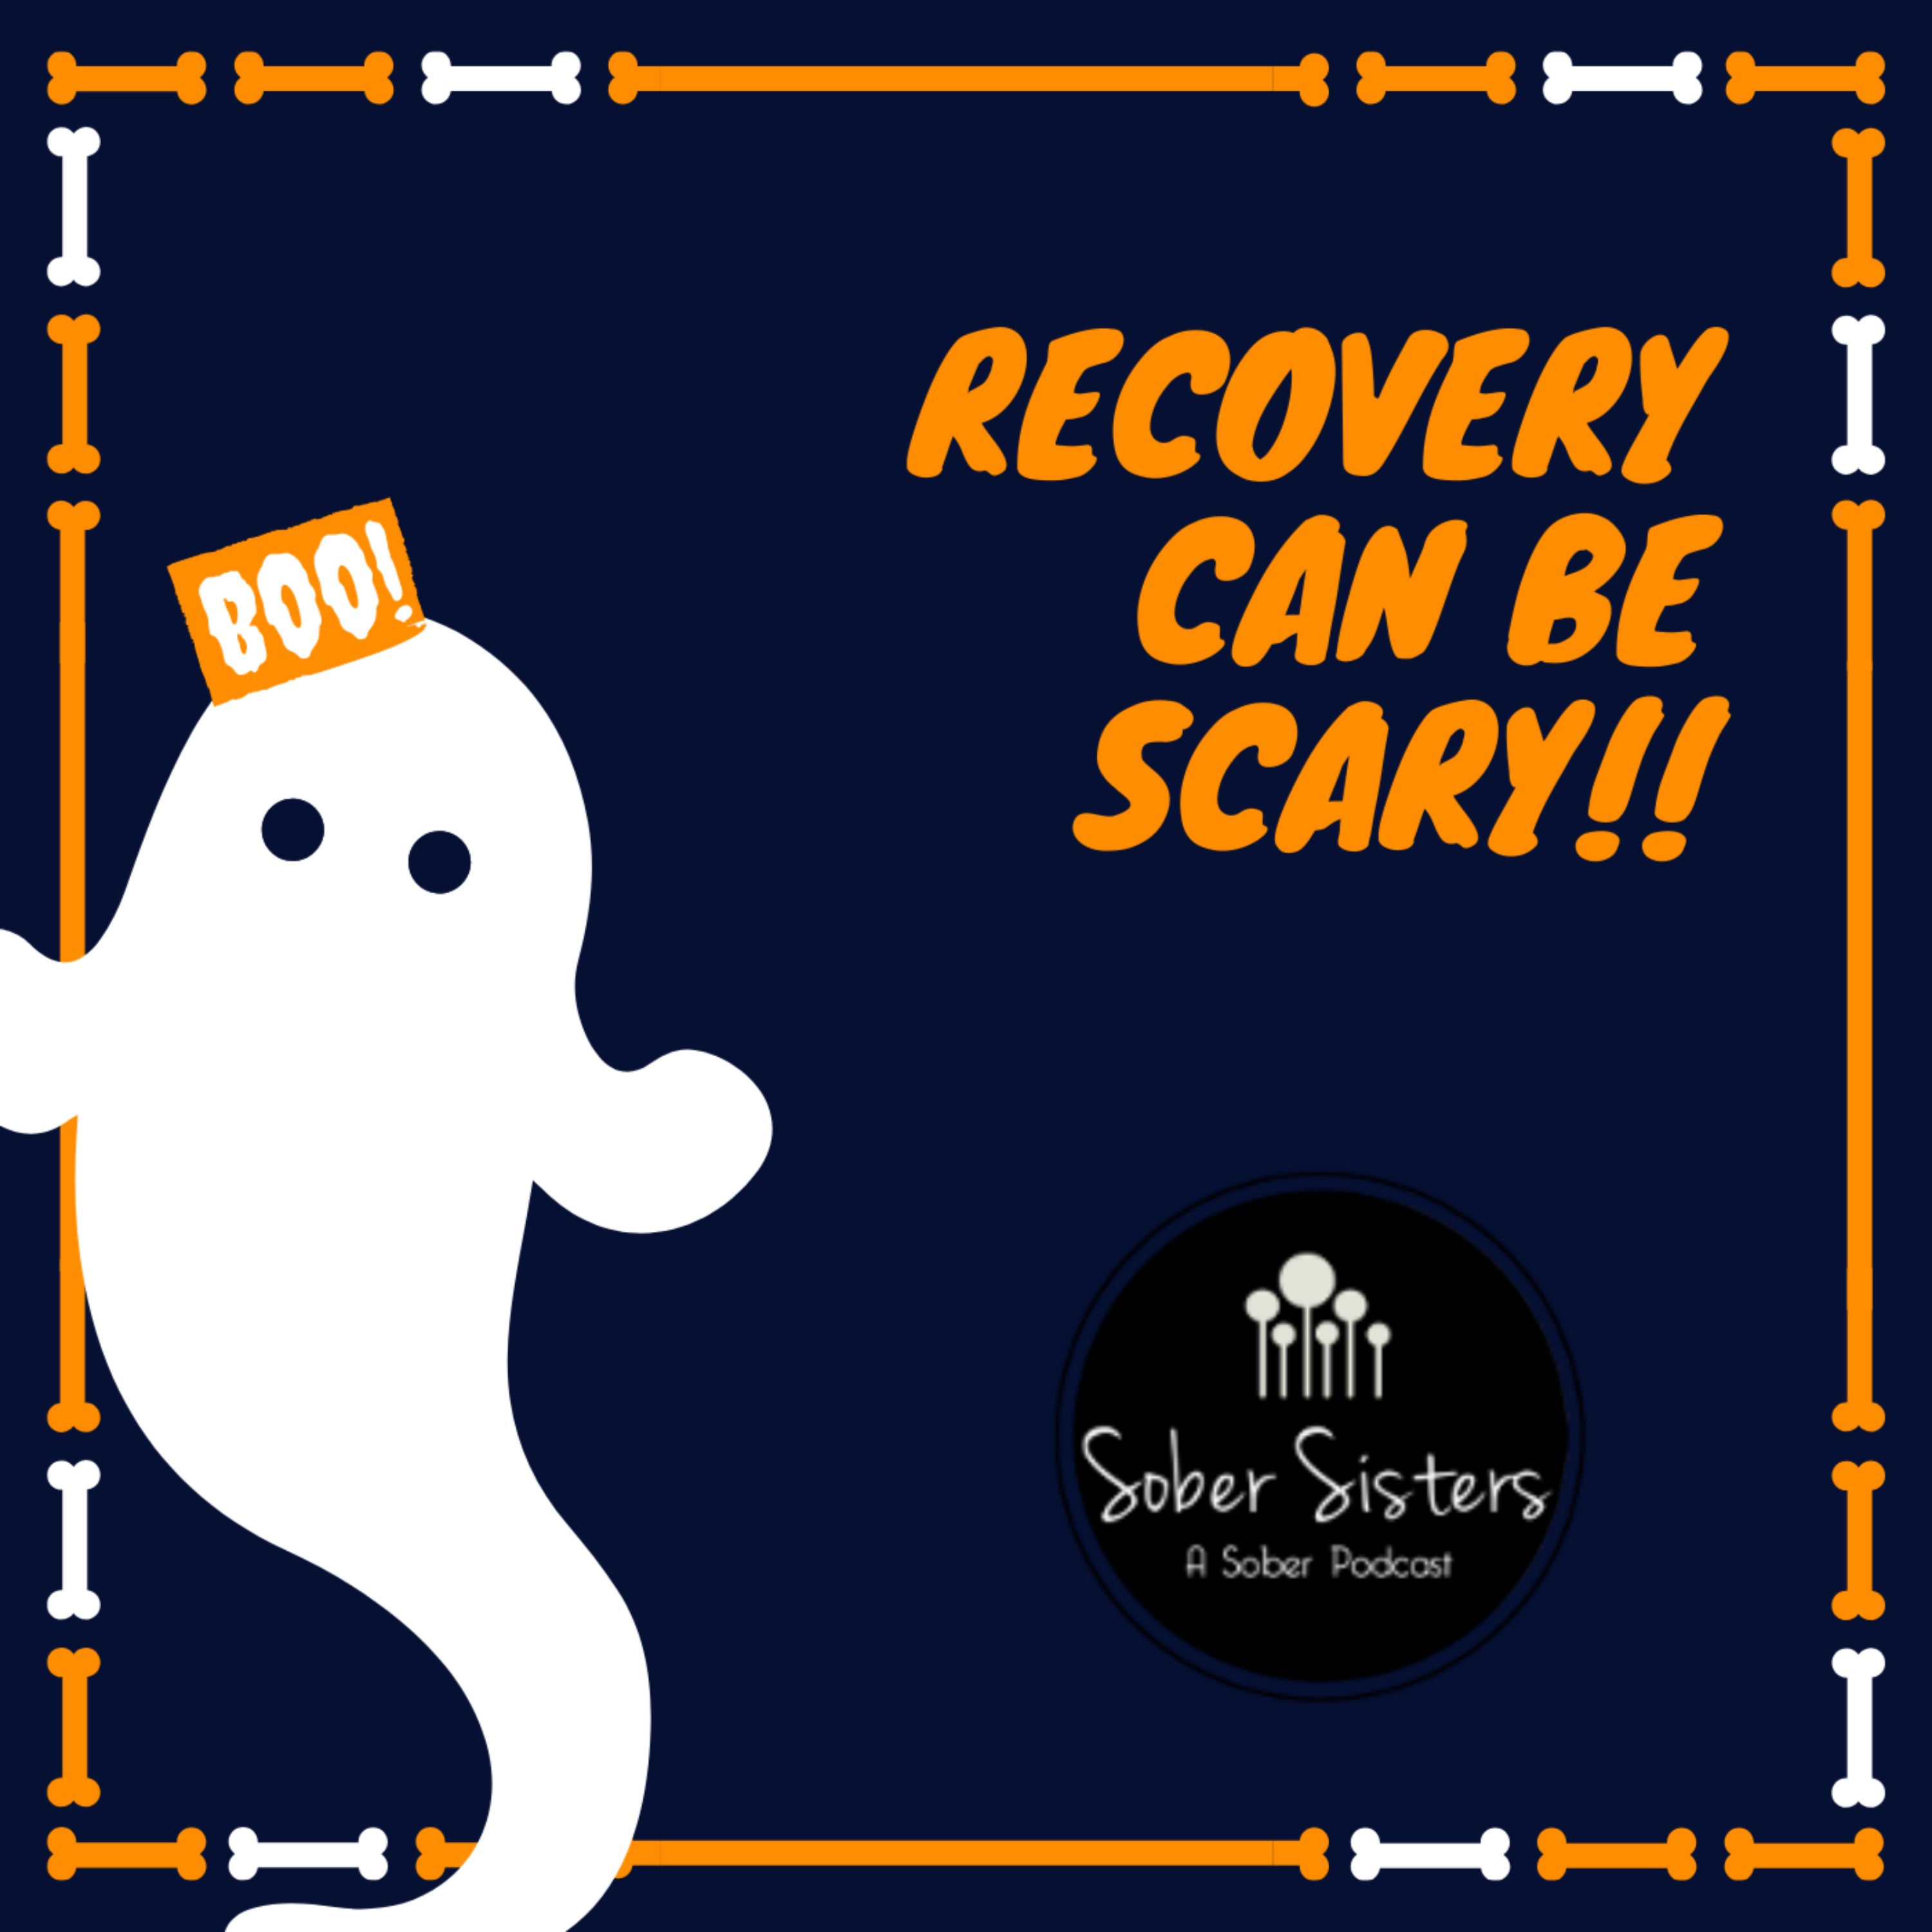 Recovery can be scary!